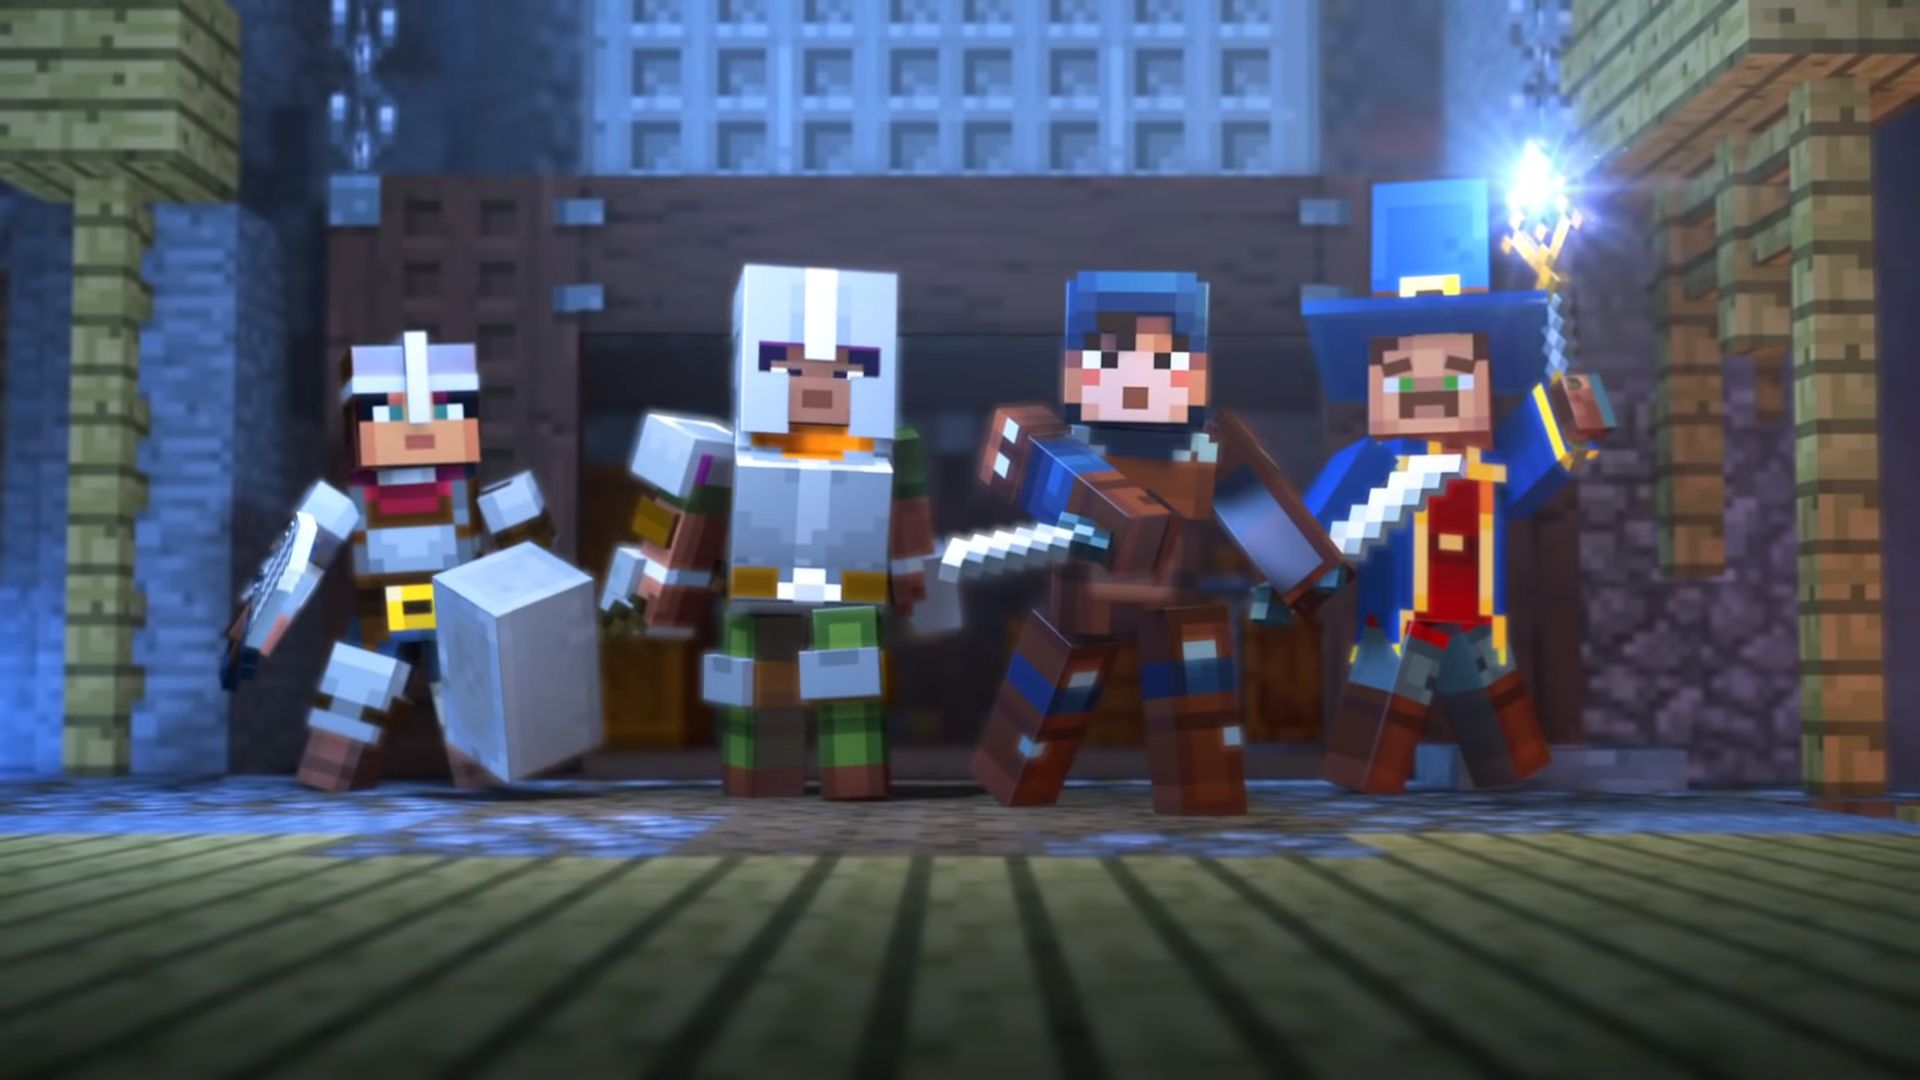 A screenshot of the new Minecraft spinoff game